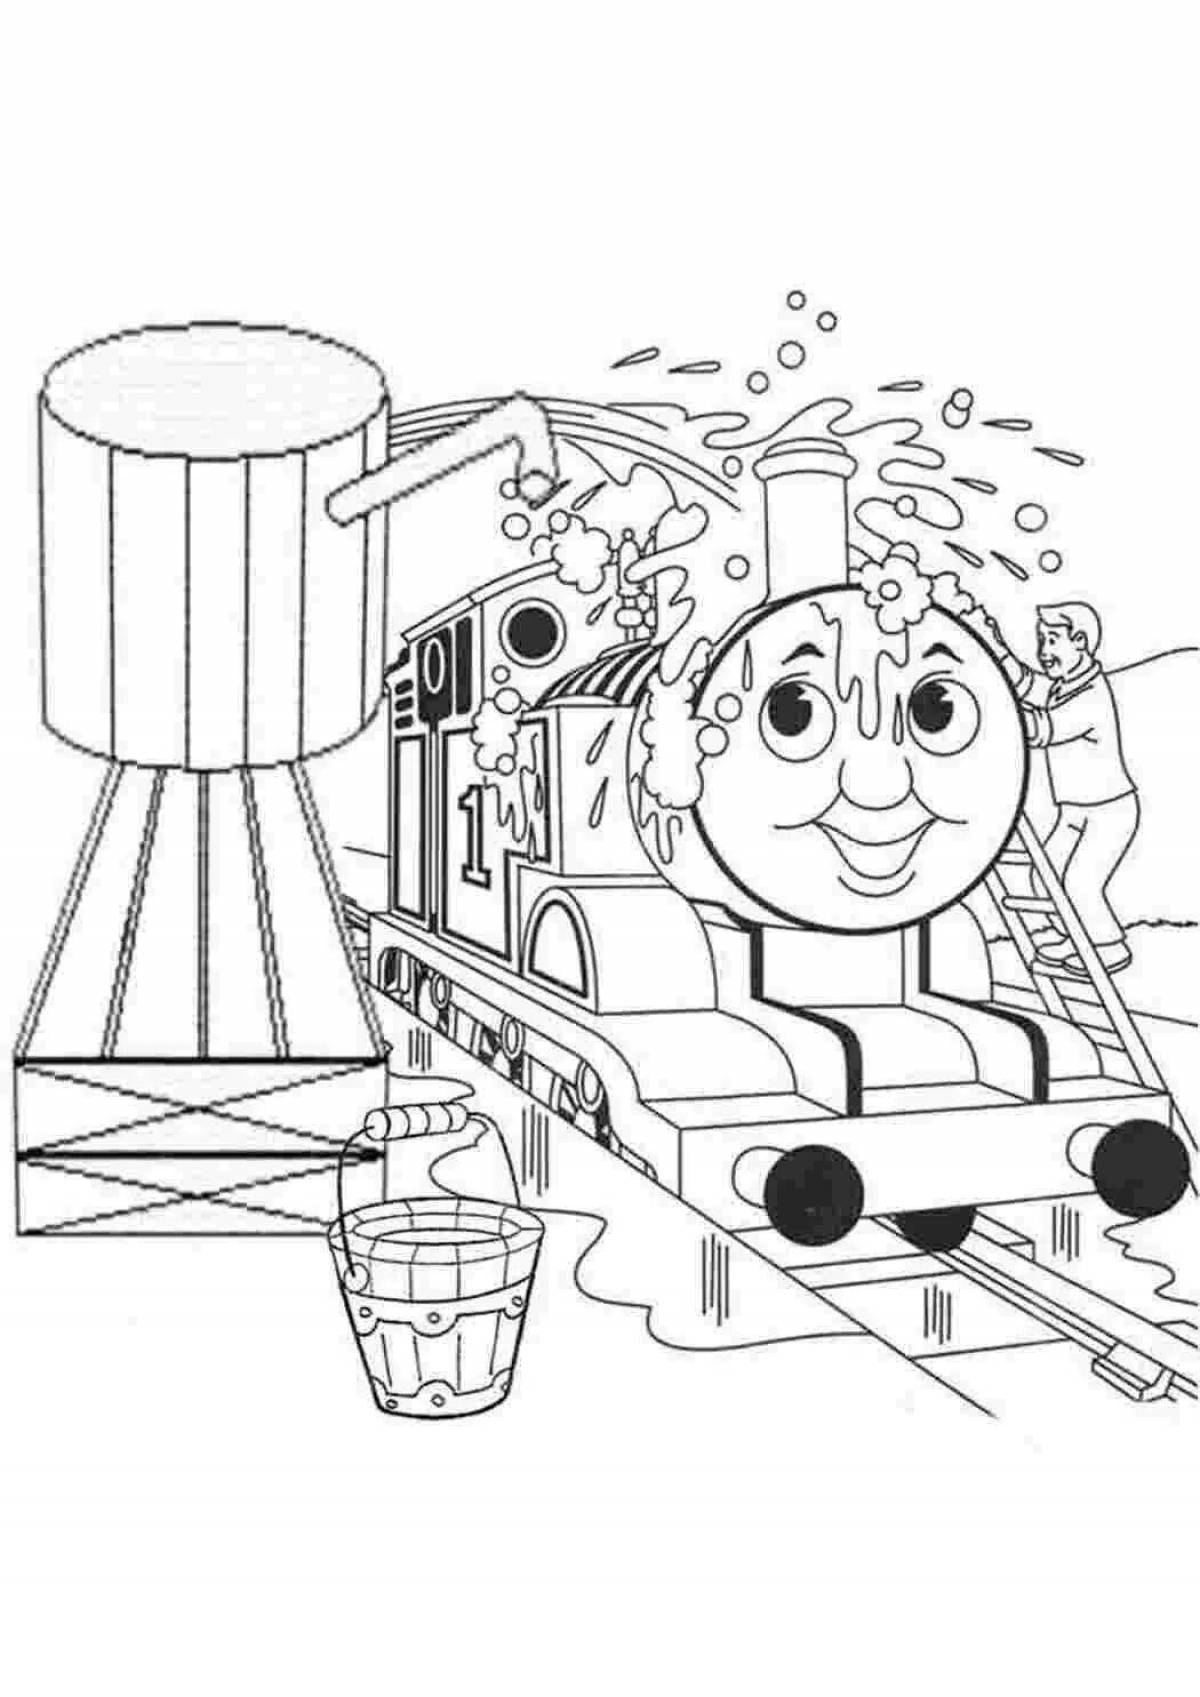 Thomas' amazing coloring book for kids